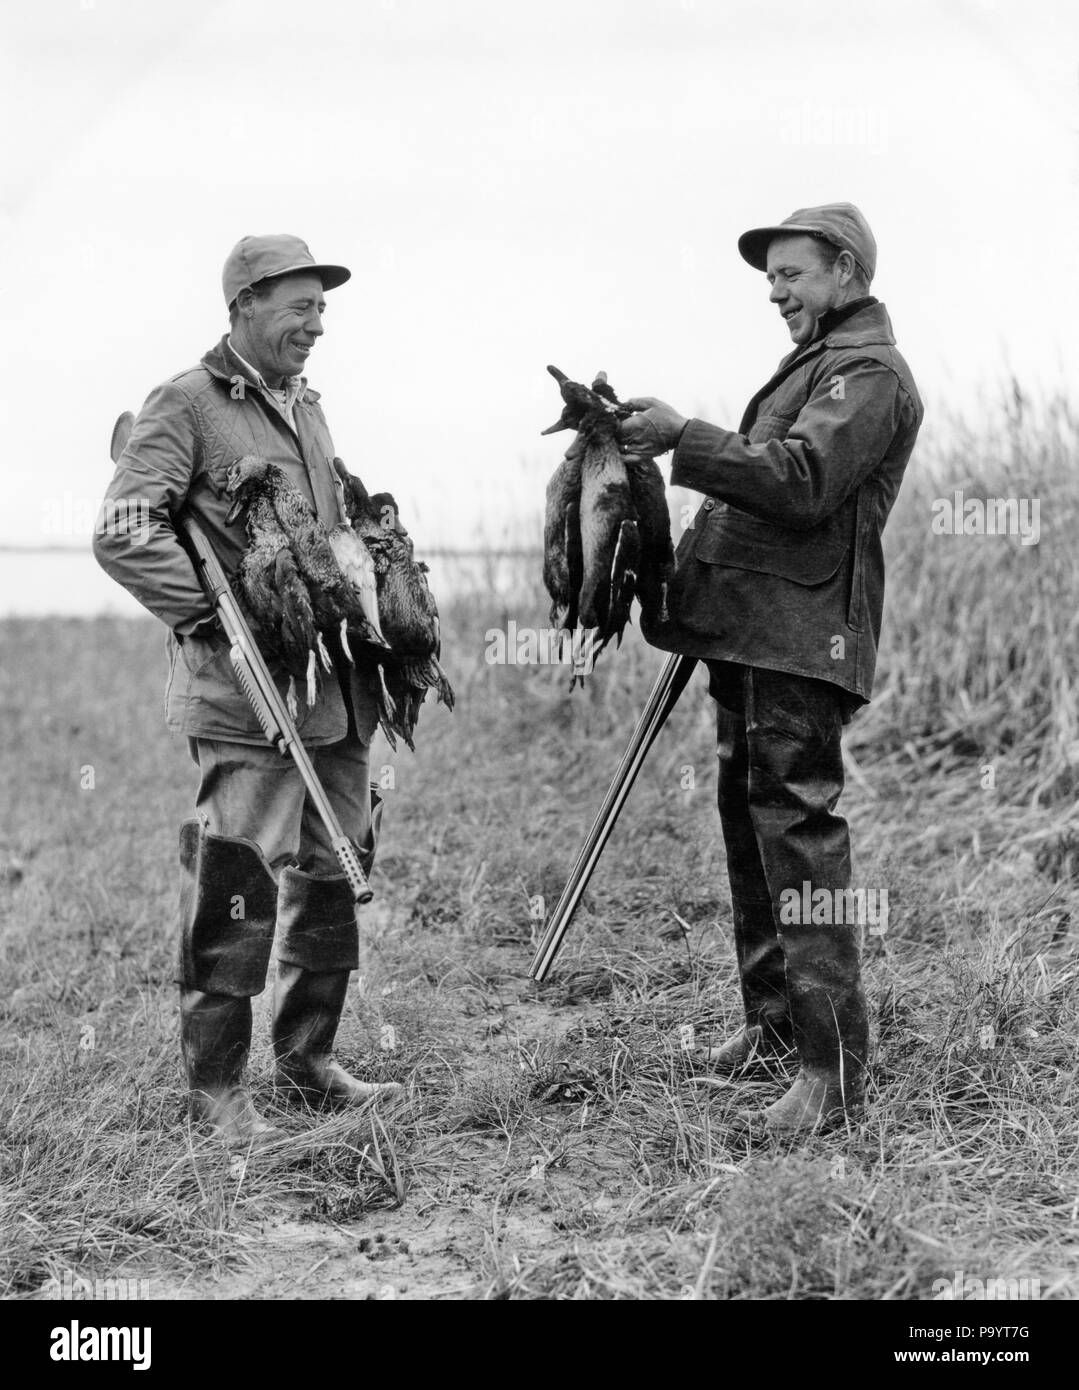 1950s TWO MEN DUCK HUNTERS WITH SHOTGUNS ADMIRING A BRACE OF DUCKS - d3806 HAR001 HARS MID-ADULT MAN SHOTGUNS TOGETHERNESS ADMIRING BLACK AND WHITE BRACE CAUCASIAN ETHNICITY HAR001 OLD FASHIONED Stock Photo